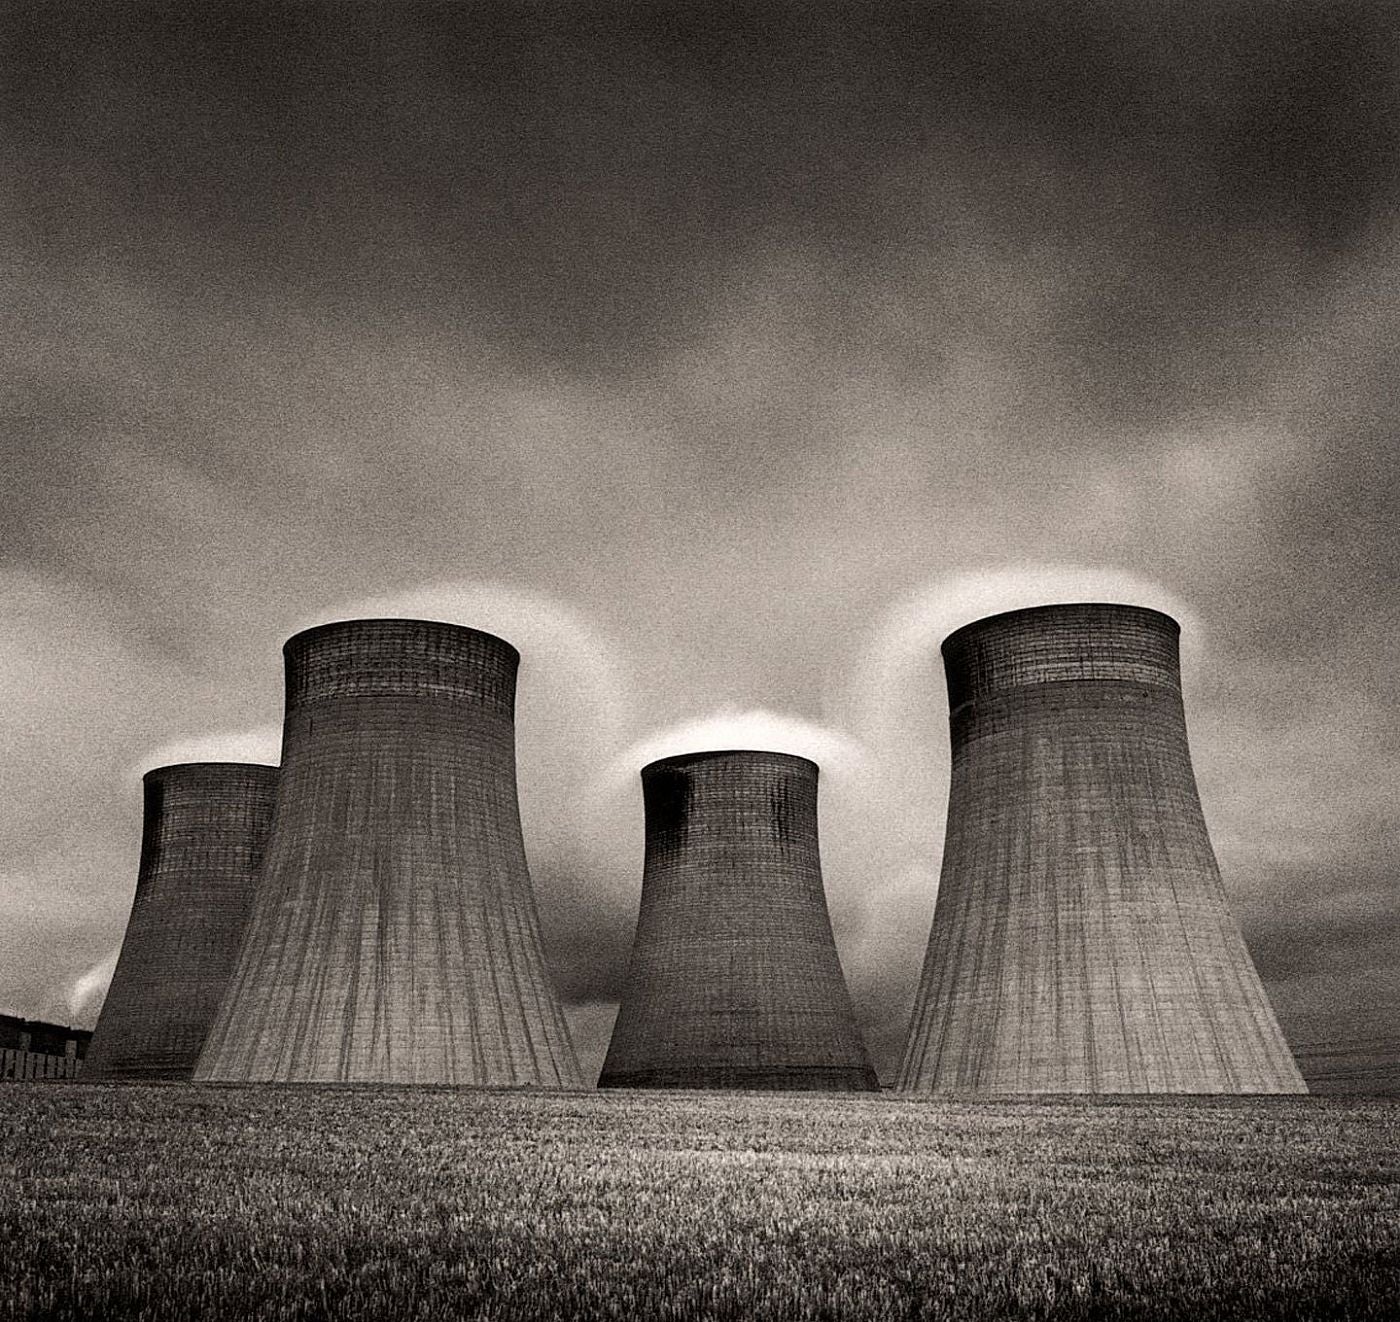 Michael Kenna: Ratcliffe Power Station [SIGNED]